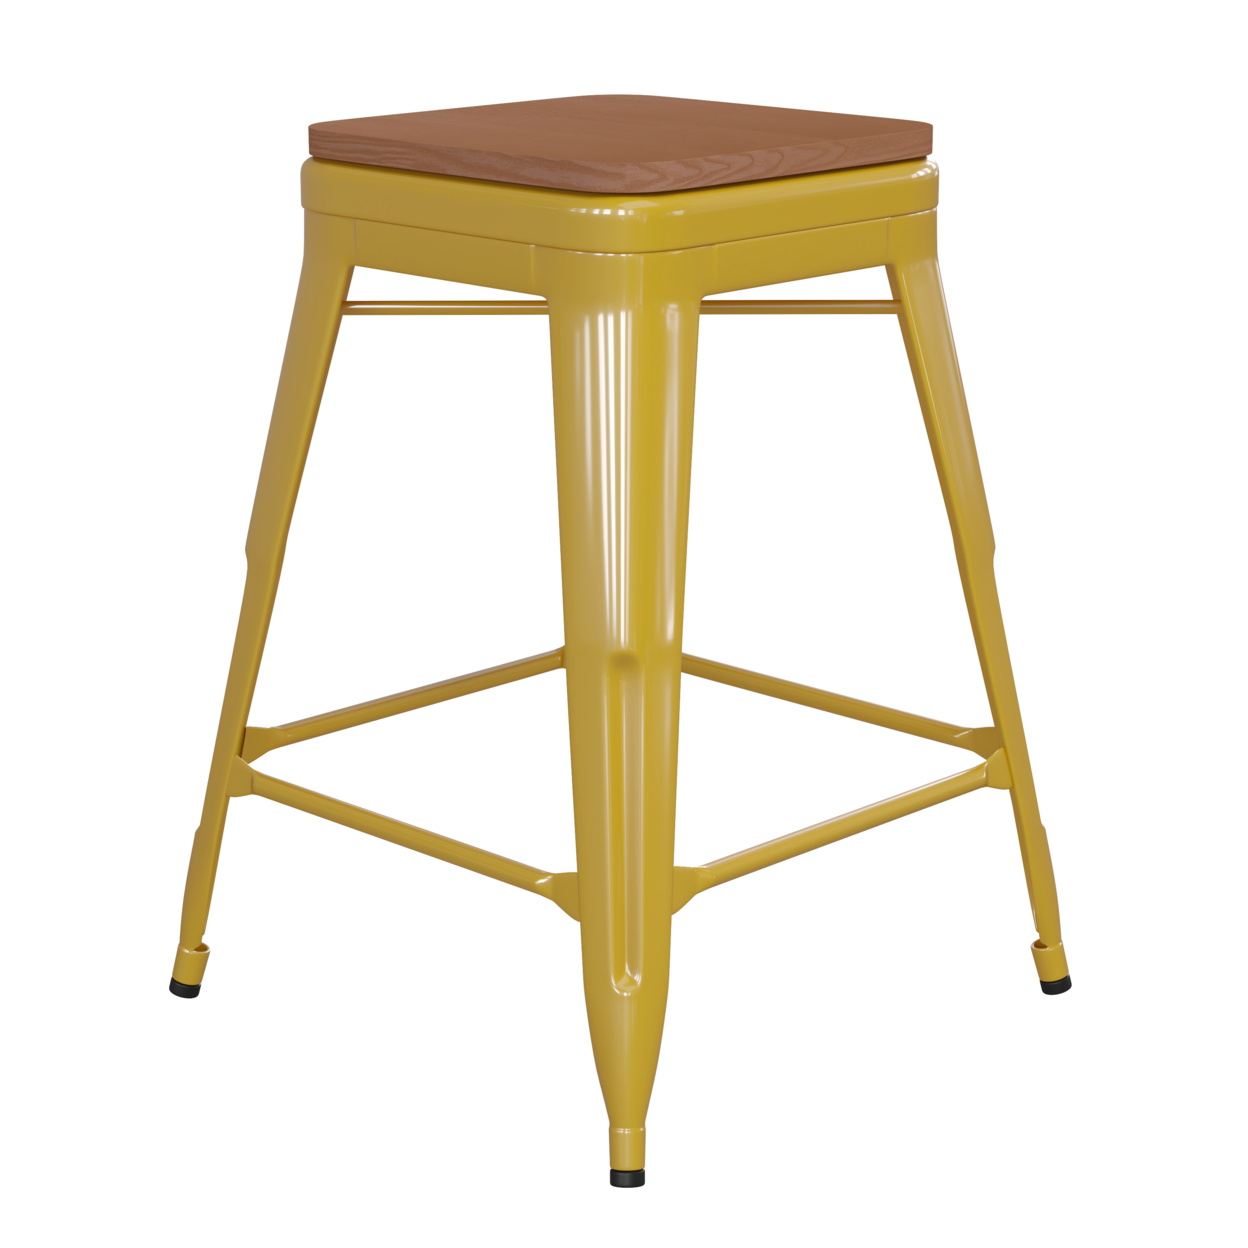 24 Inch Metal Stool, Thick Wood Seat, Yellow